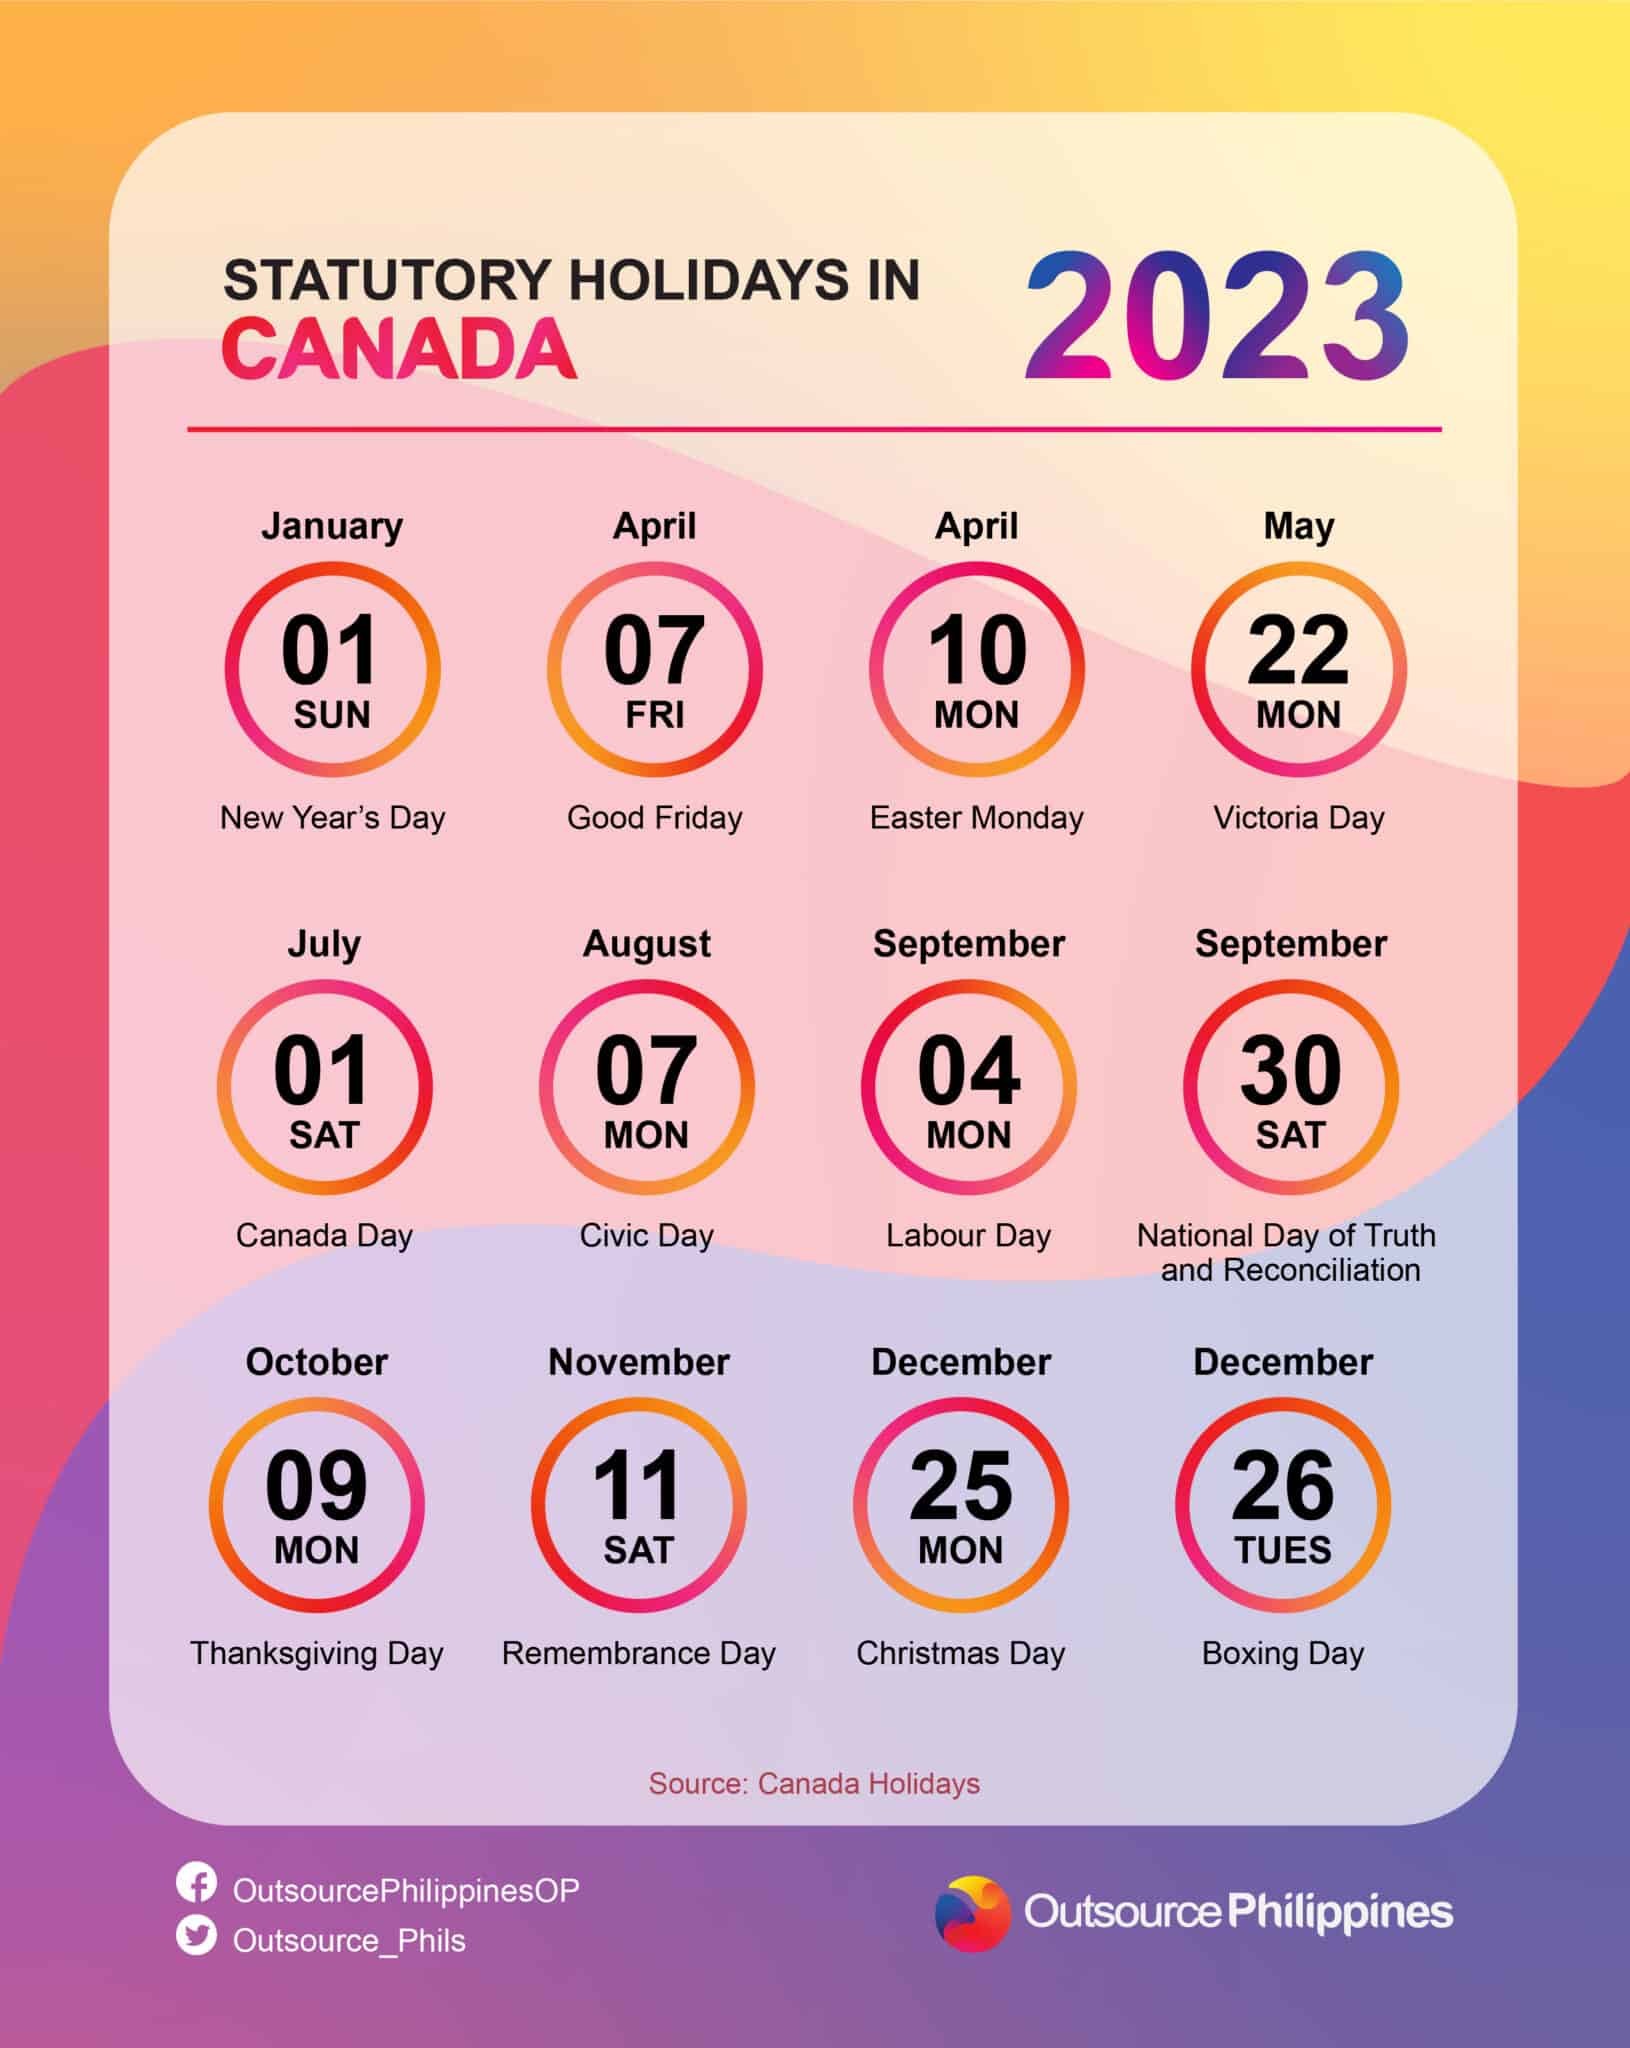 OP HOLIDAY CHART Canada Holidays 1630x2048 